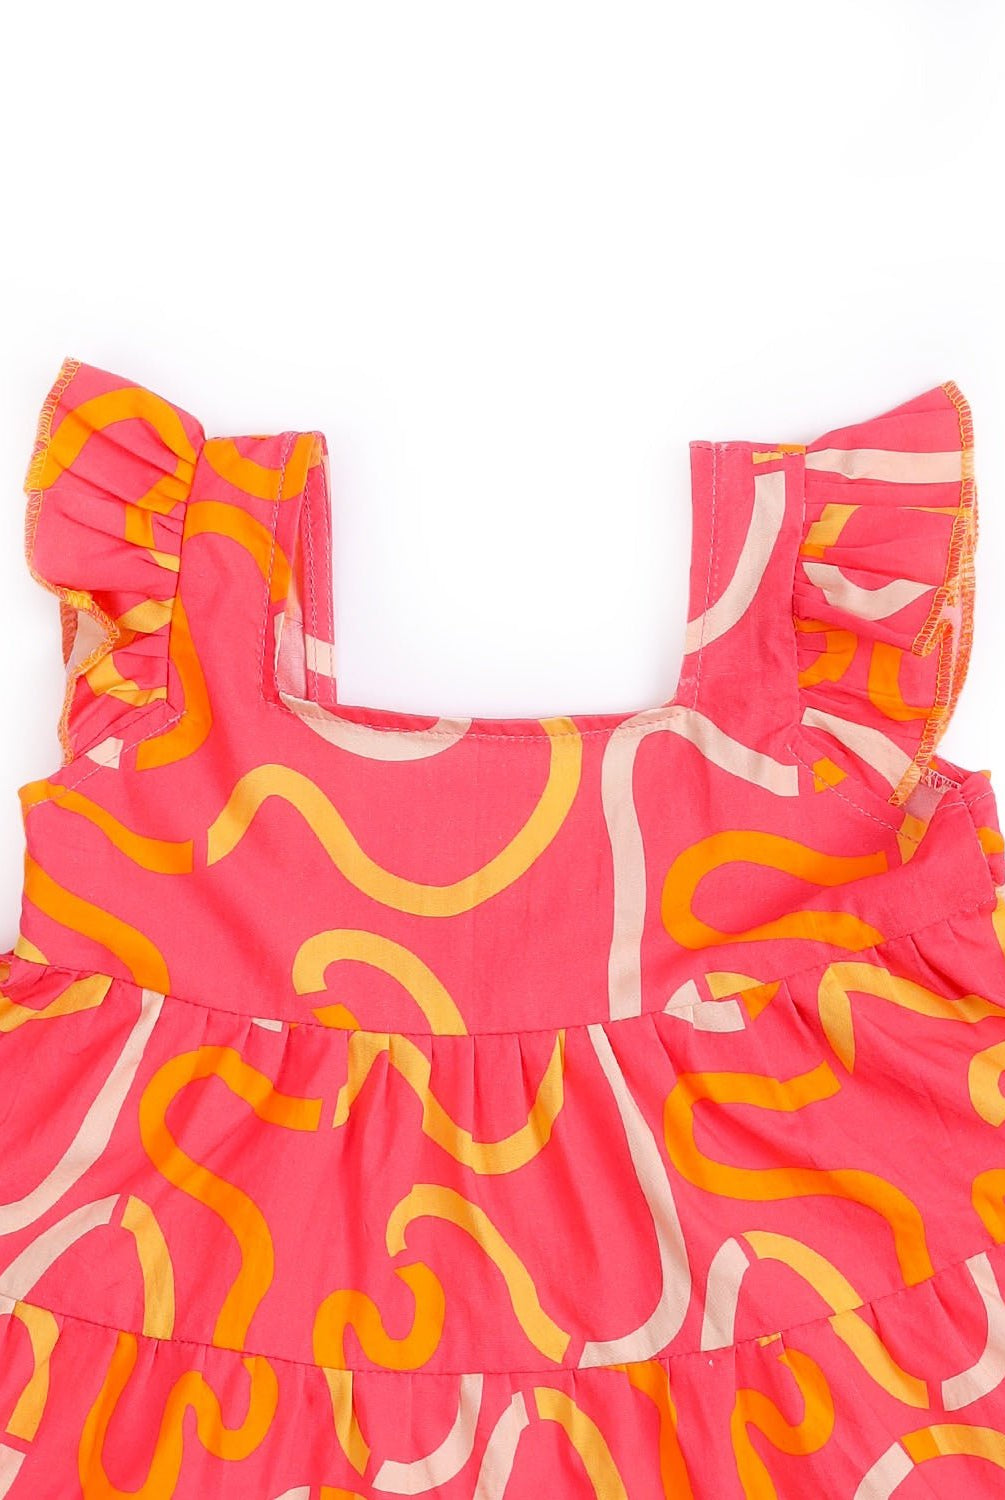 Swiggly Tiered Frock - CiceroniDressesMiko Lolo